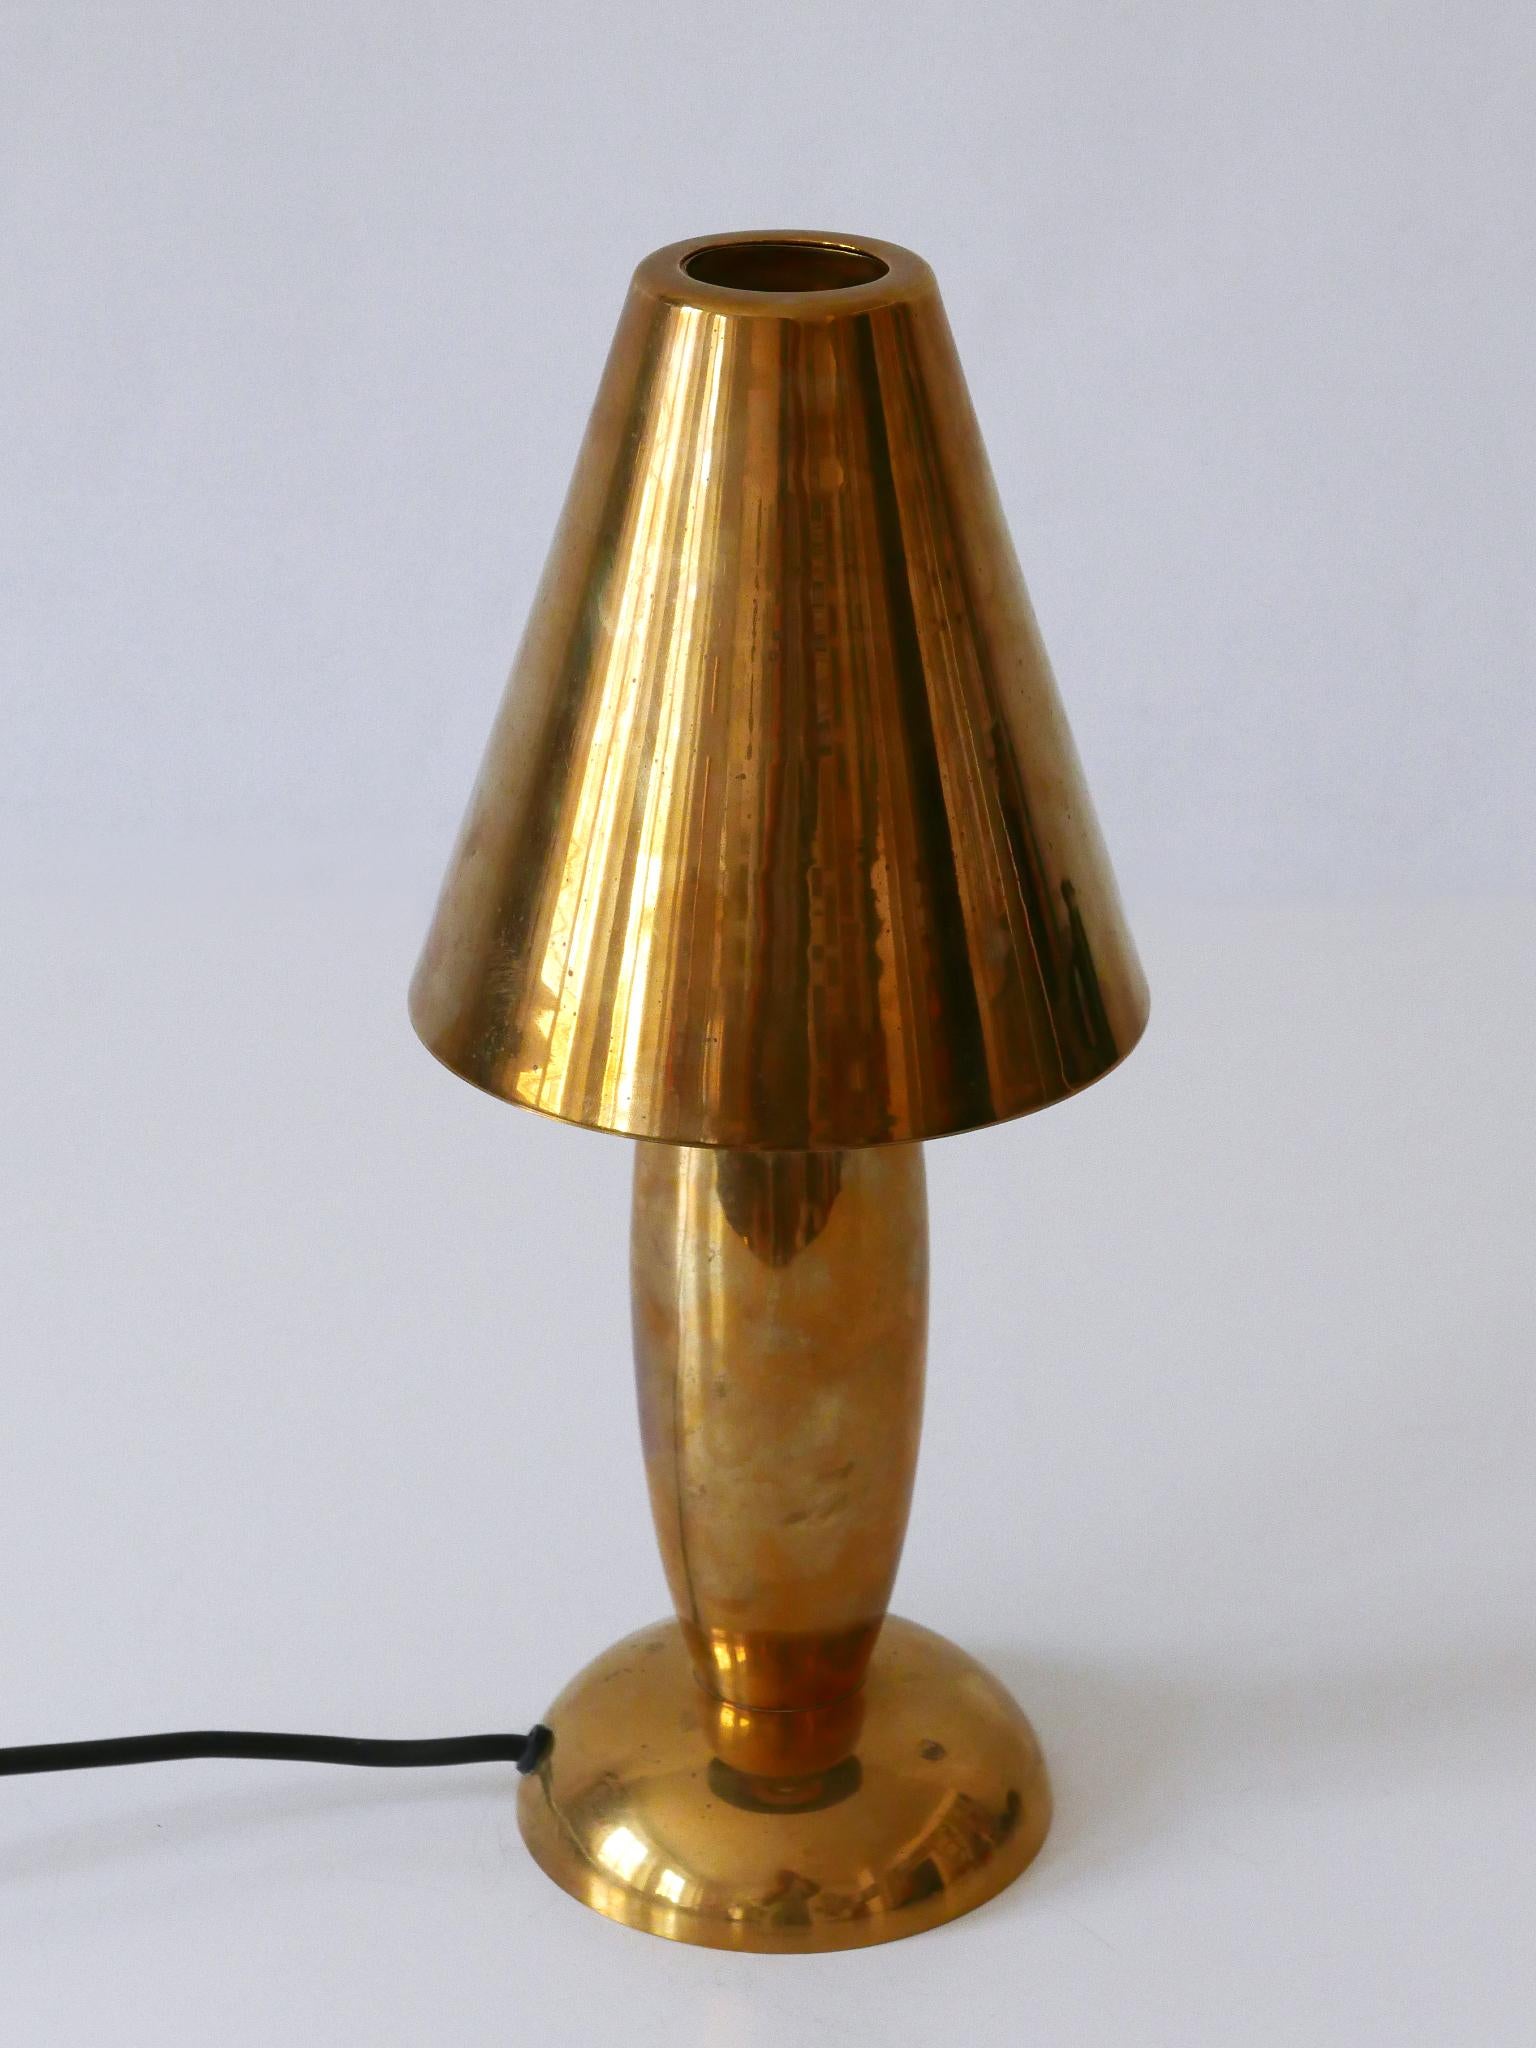 Rare & Lovely Mid-Century Modern Brass Side Table Lamp by Lambert Germany 1970s For Sale 7